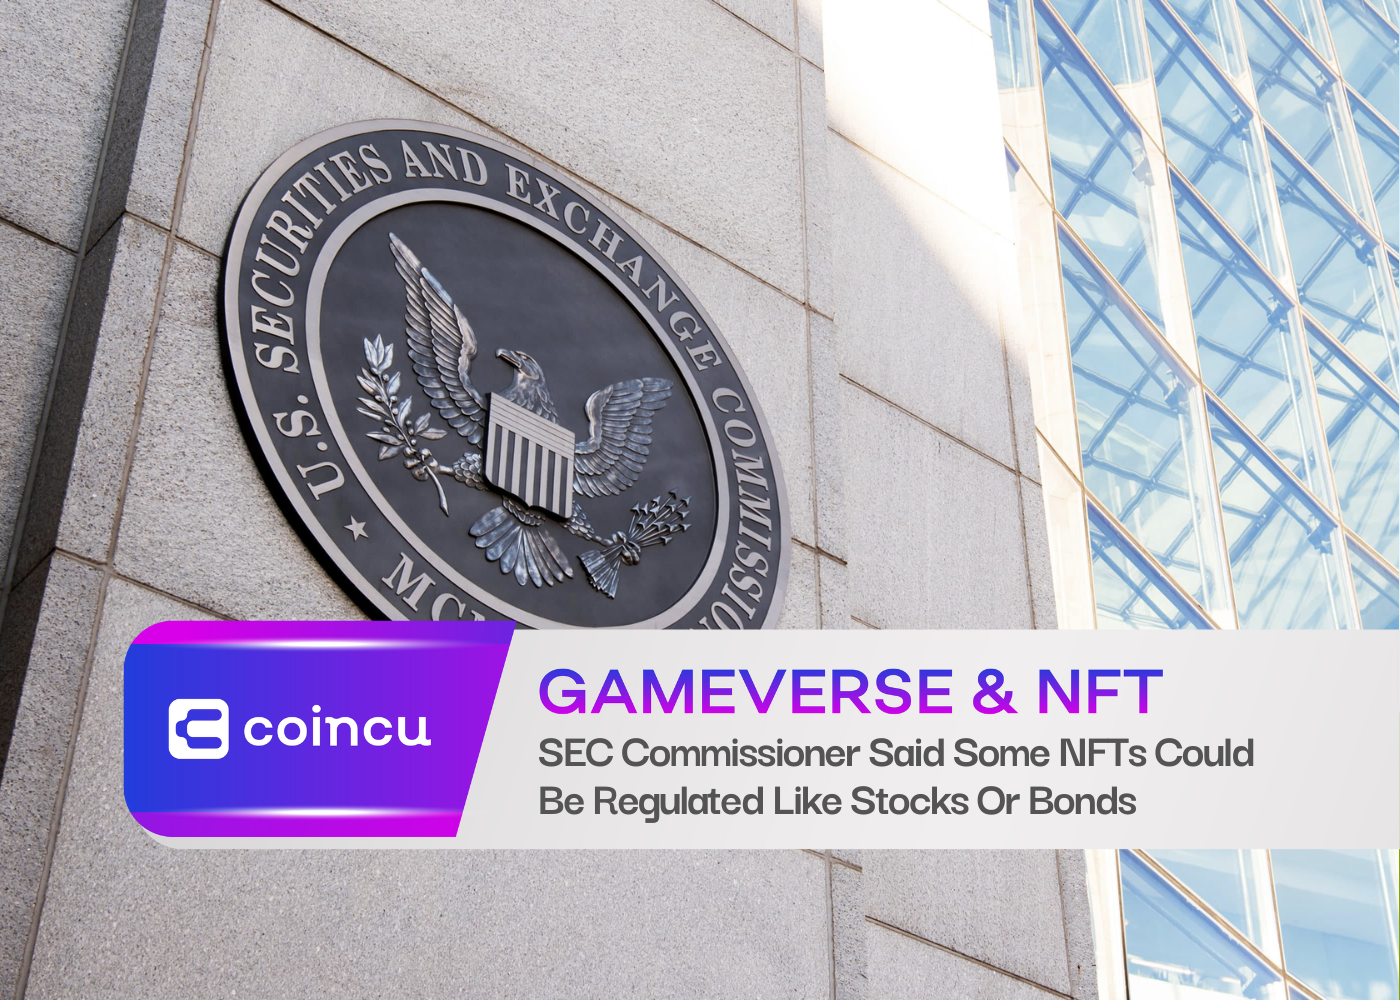 SEC Commissioner Said Some NFTs Could Be Regulated Like Stocks Or Bonds